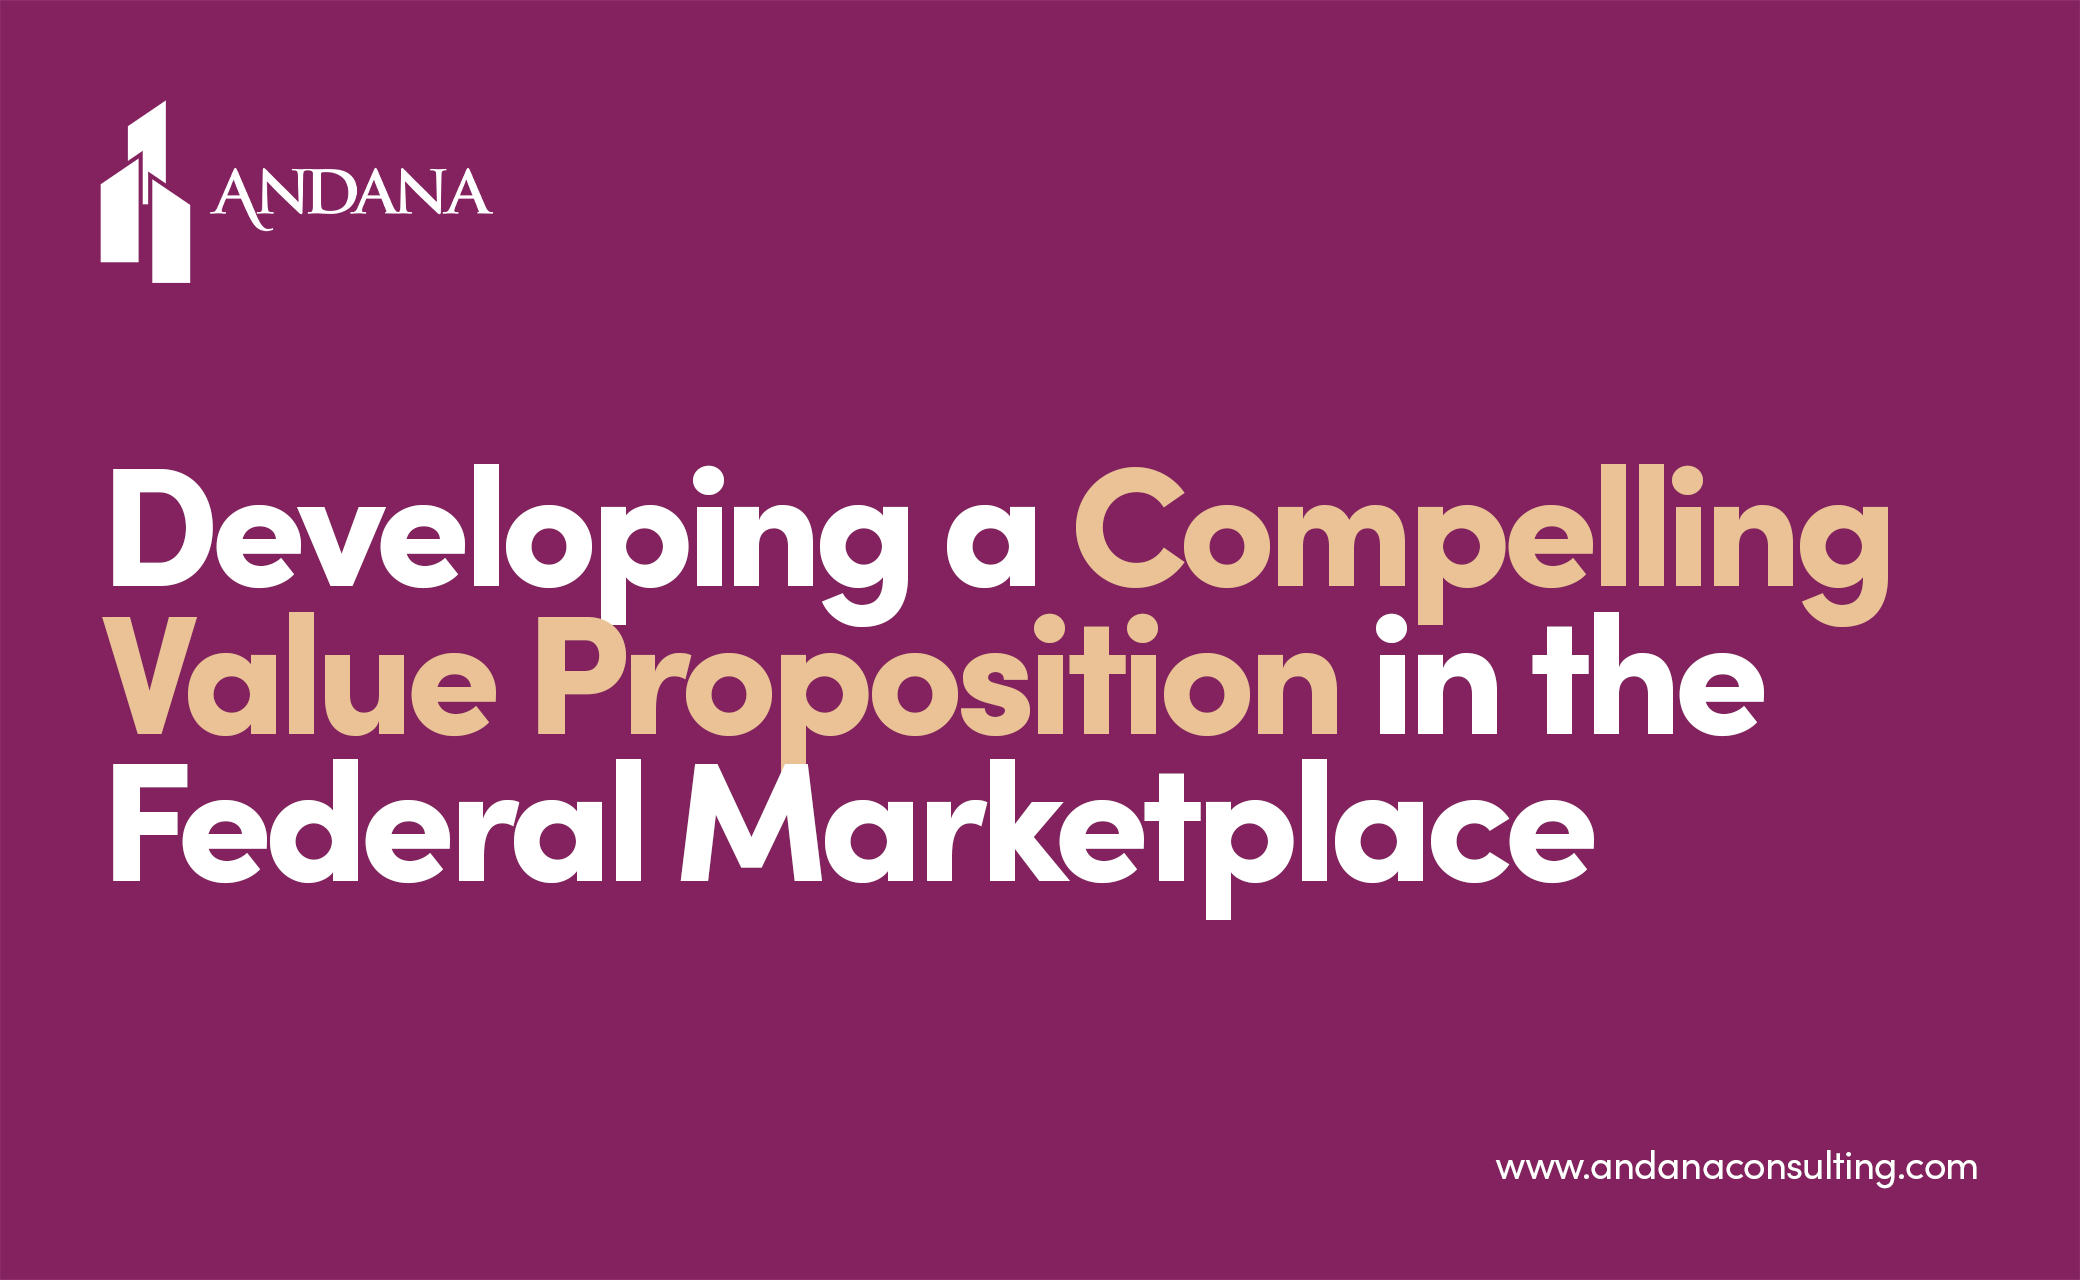 Developing a Compelling Value Proposition in the Federal Marketplace